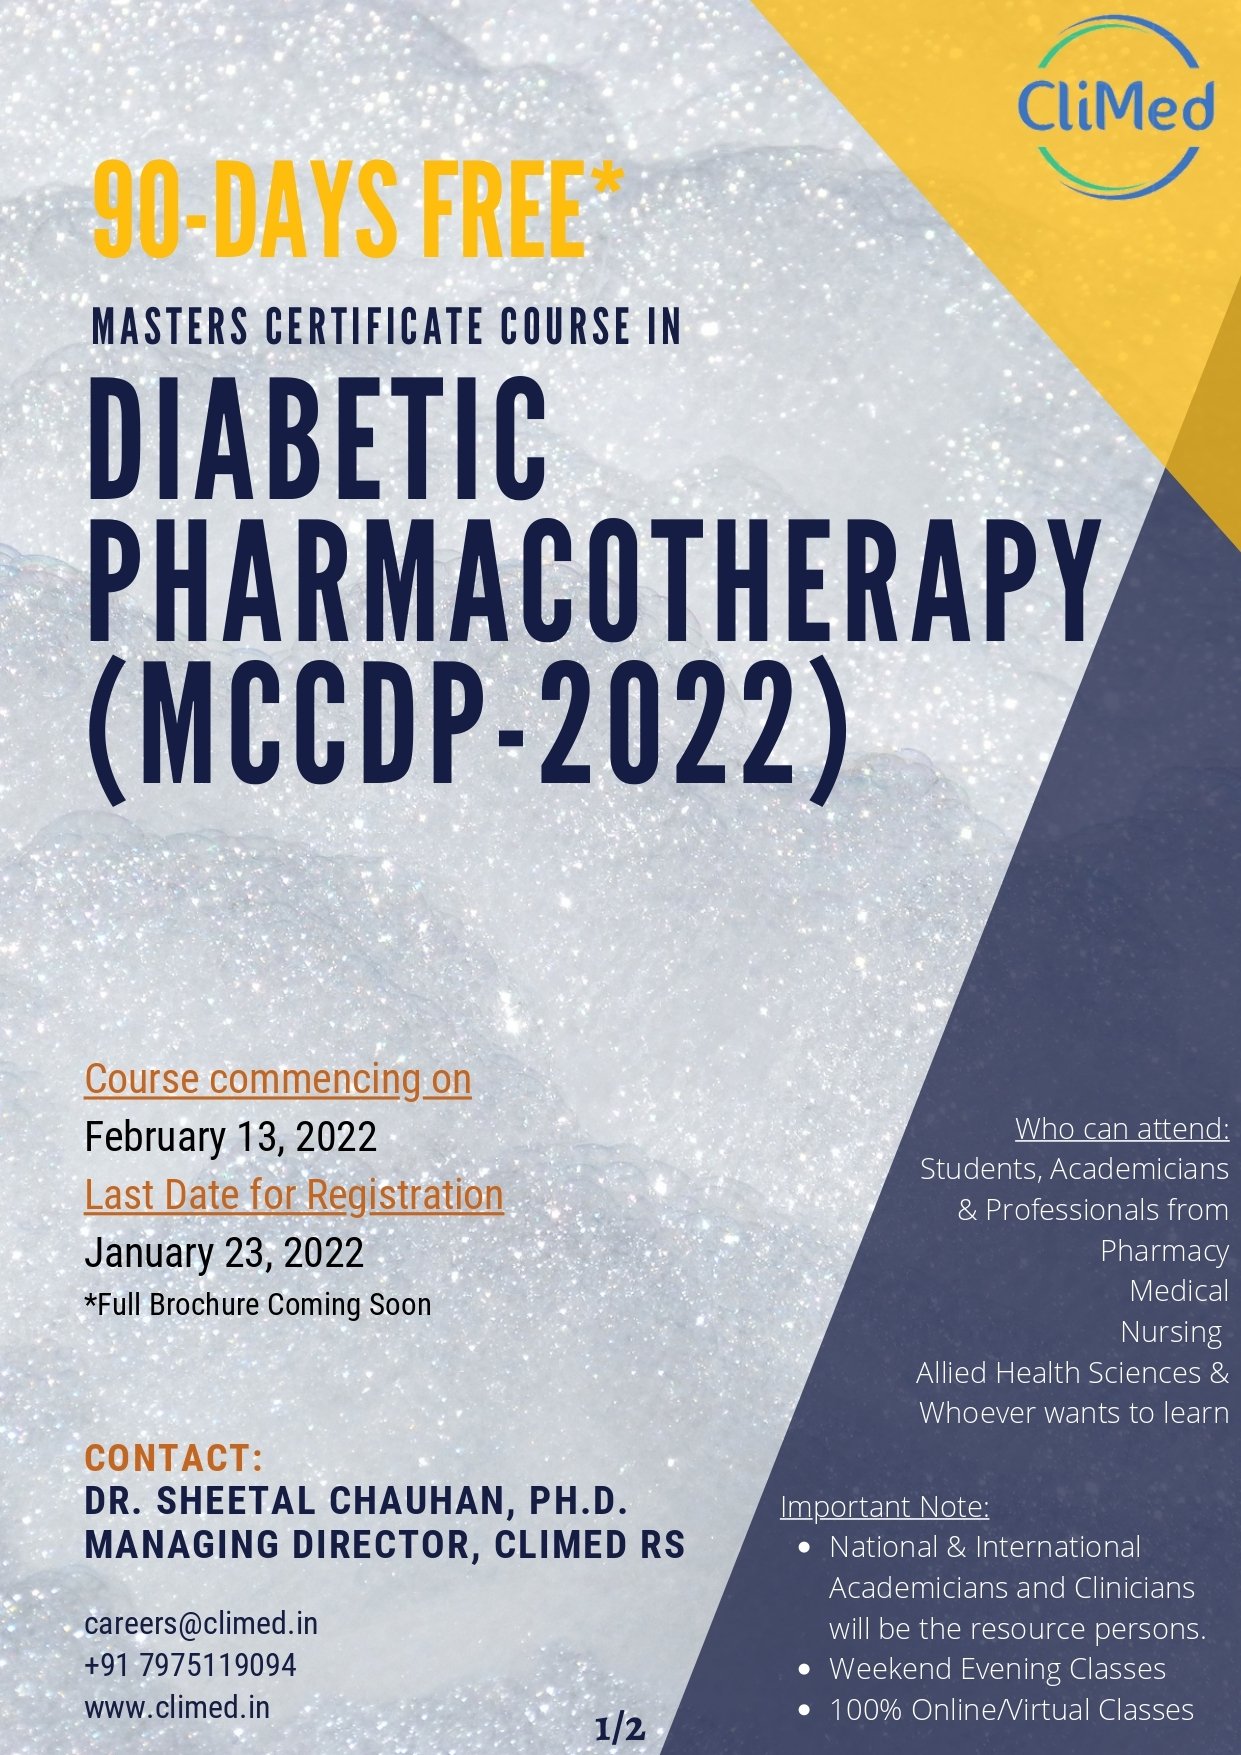 90-days Free Masters Certificate Course in Diabetic Pharmacotherapy